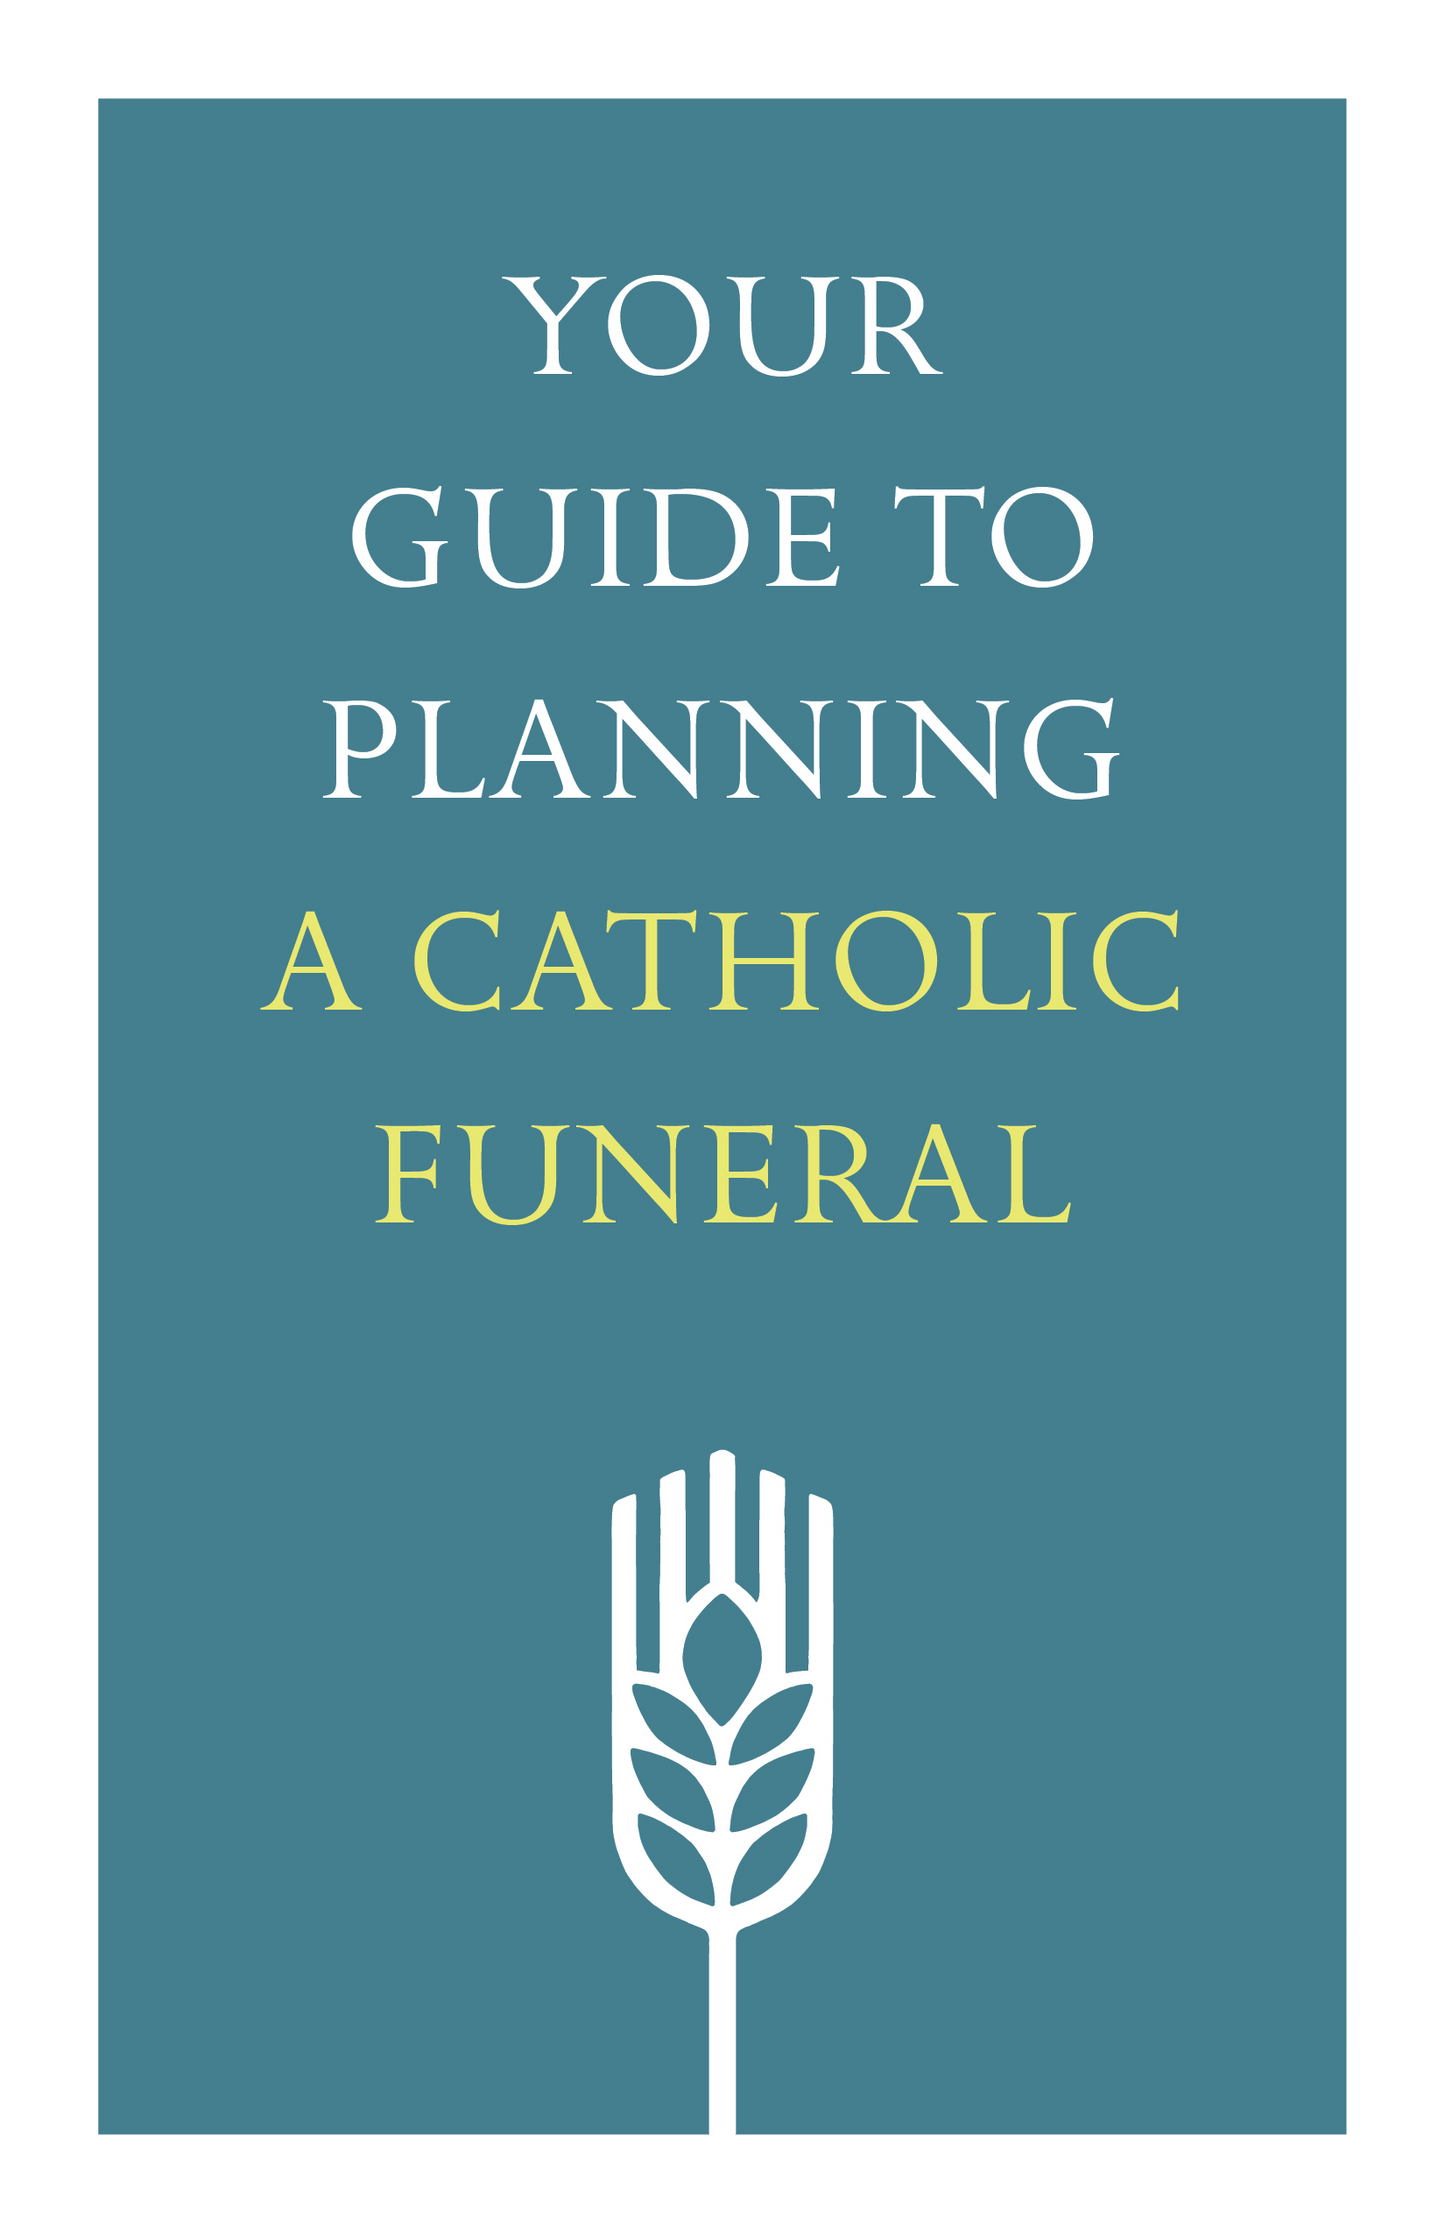 Your Guide to Planning a Catholic Funeral